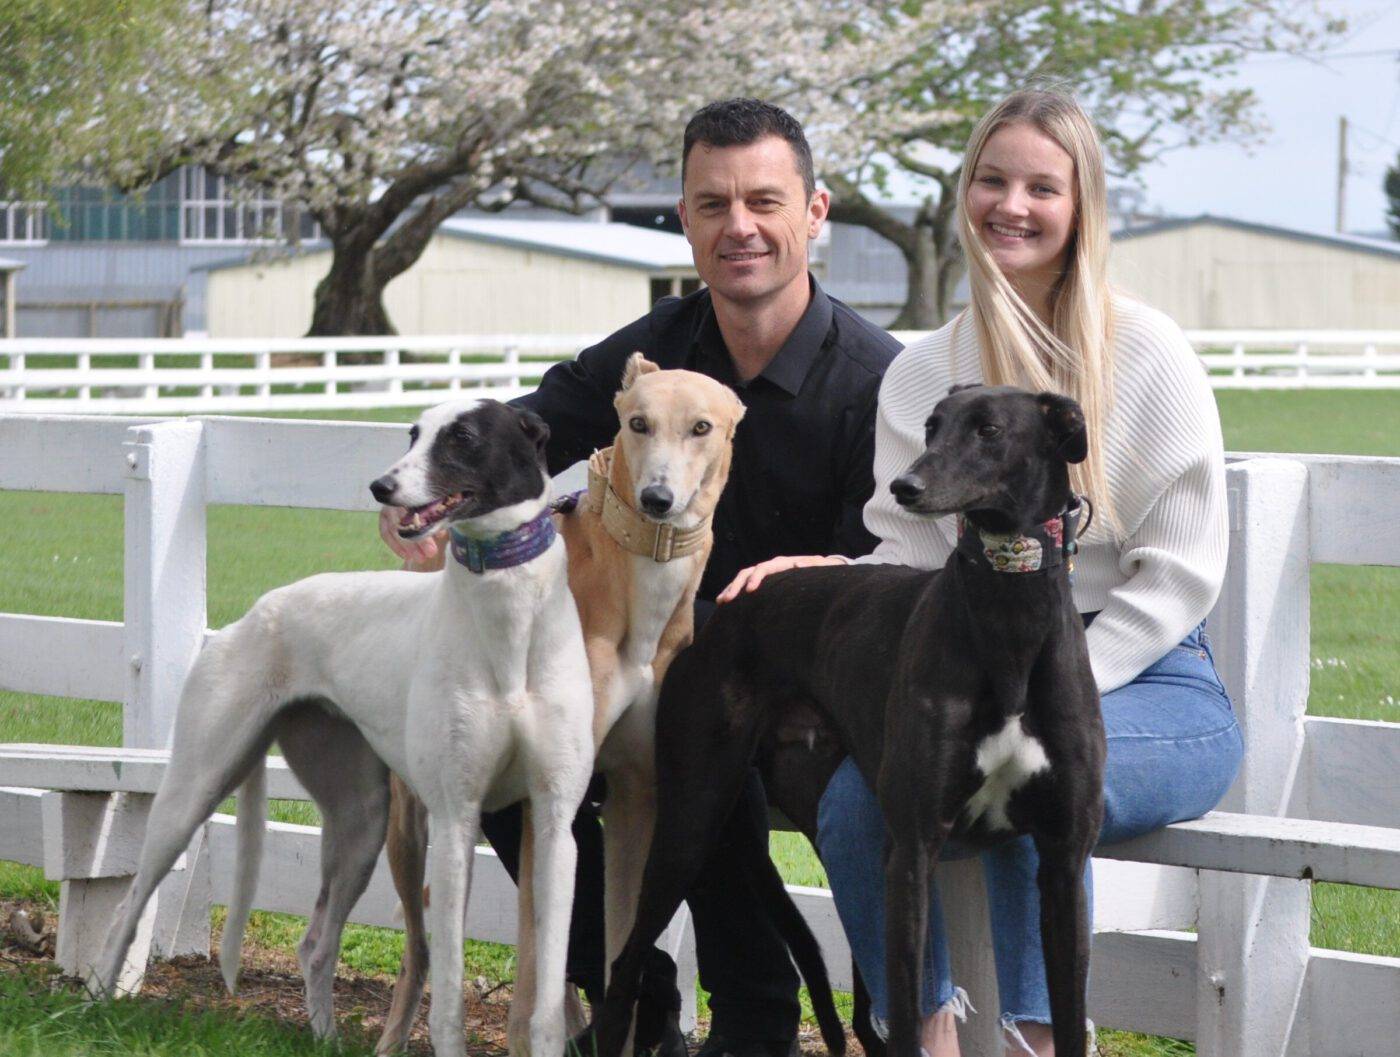 Team members with greyhounds from Greyhounds As Pets organisation